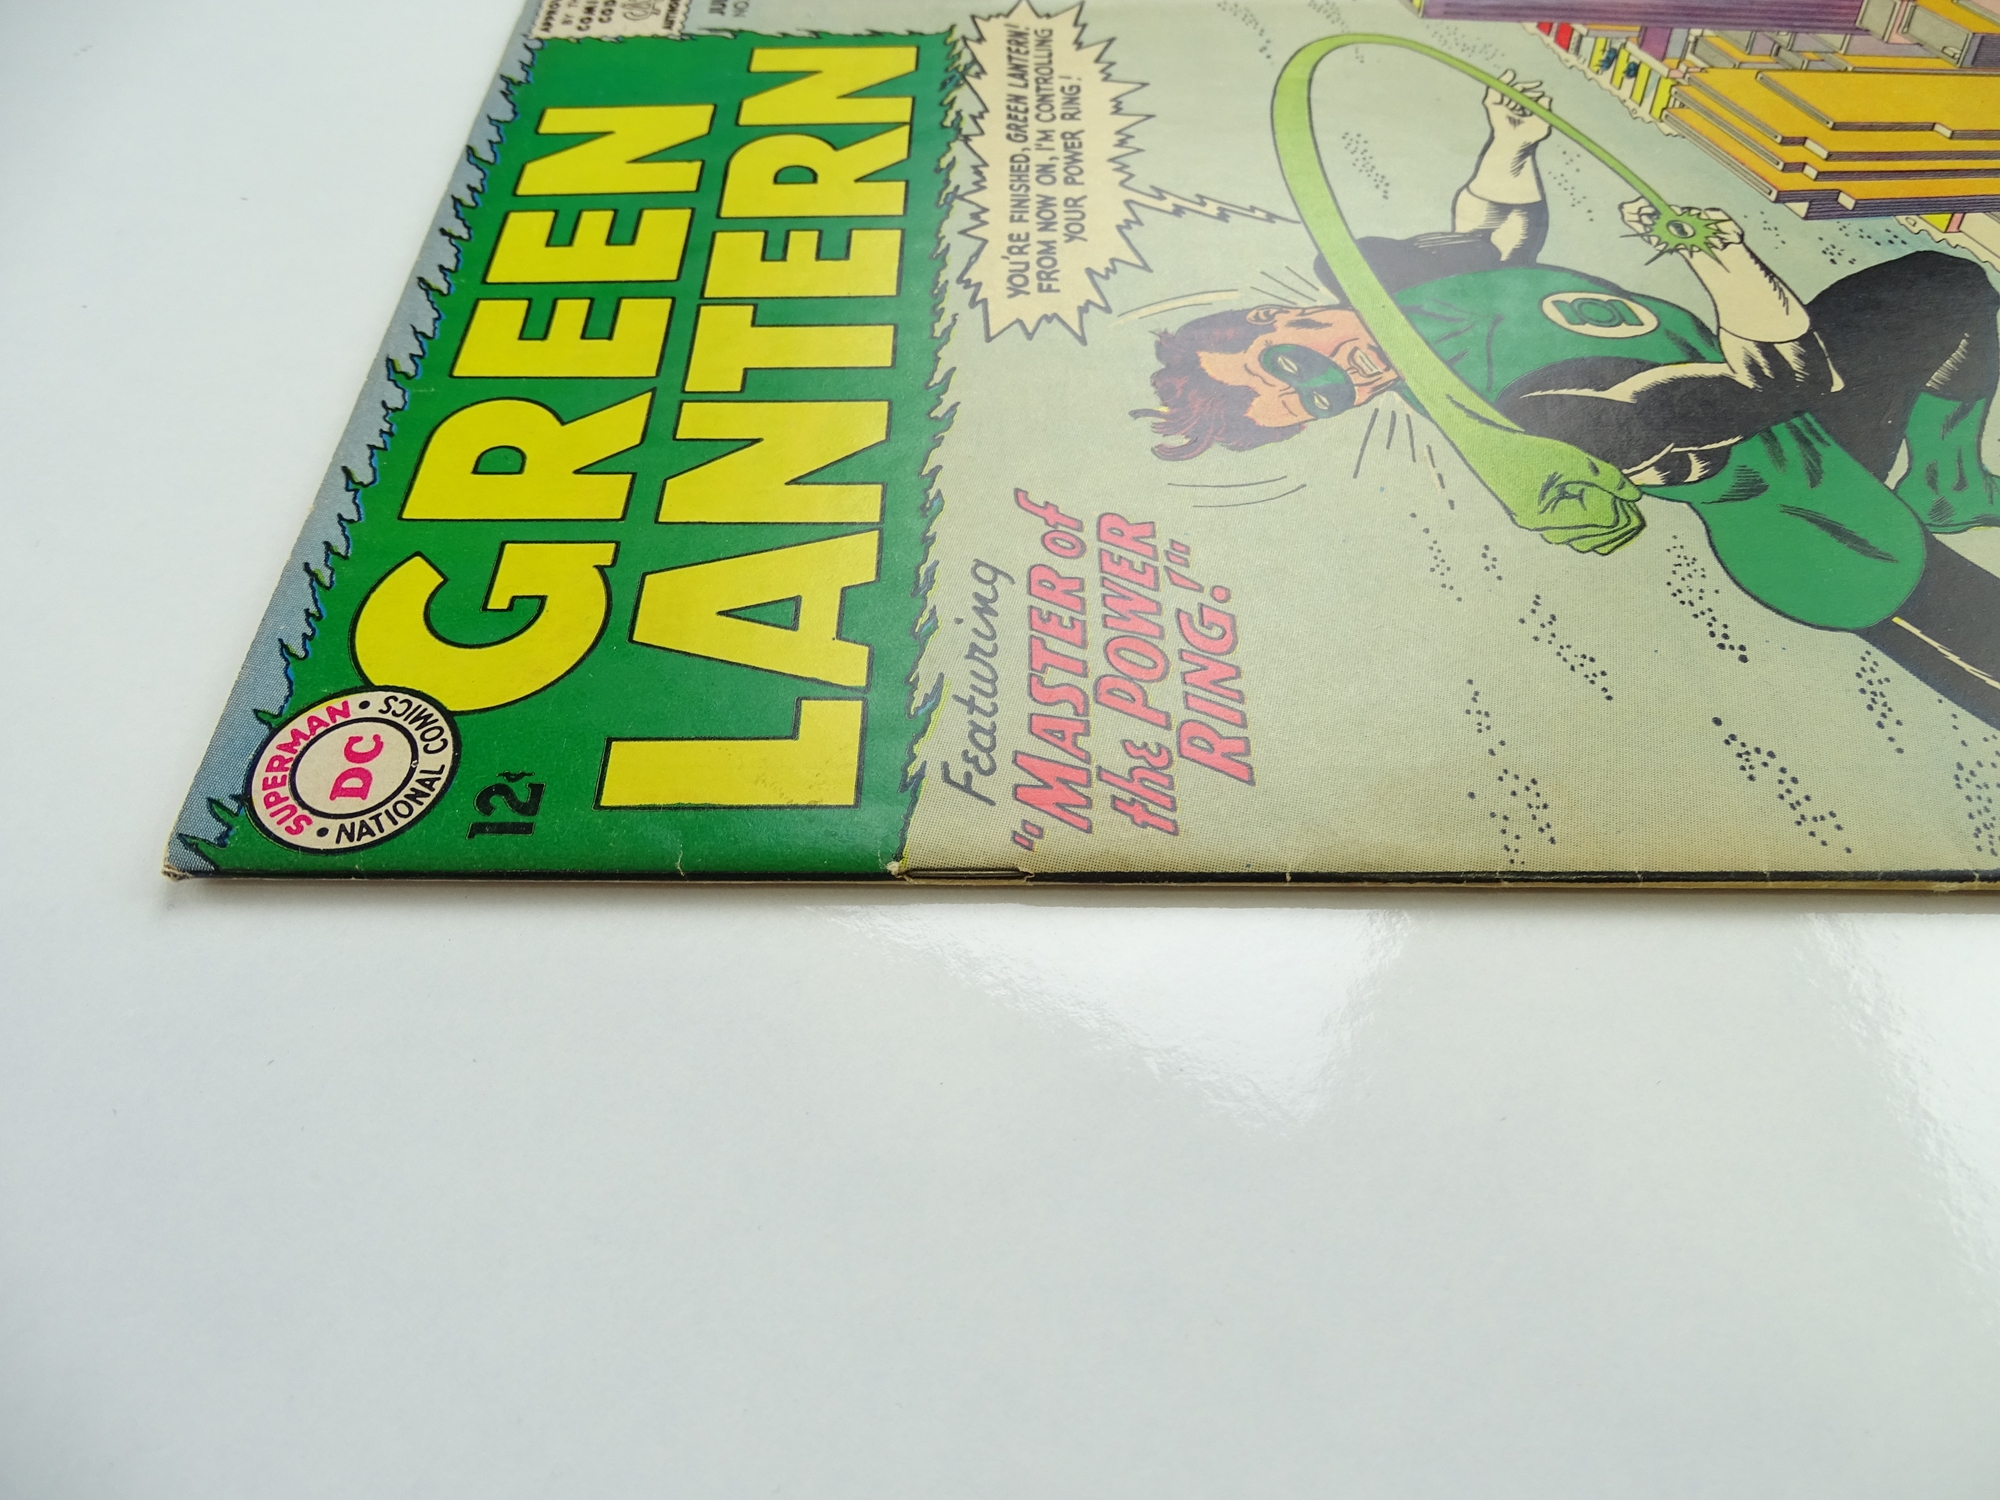 GREEN LANTERN # 22 - (1963 - DC - Cents Copy) - Hector Hammond appearance + Jordan Brothers backup - Image 6 of 7